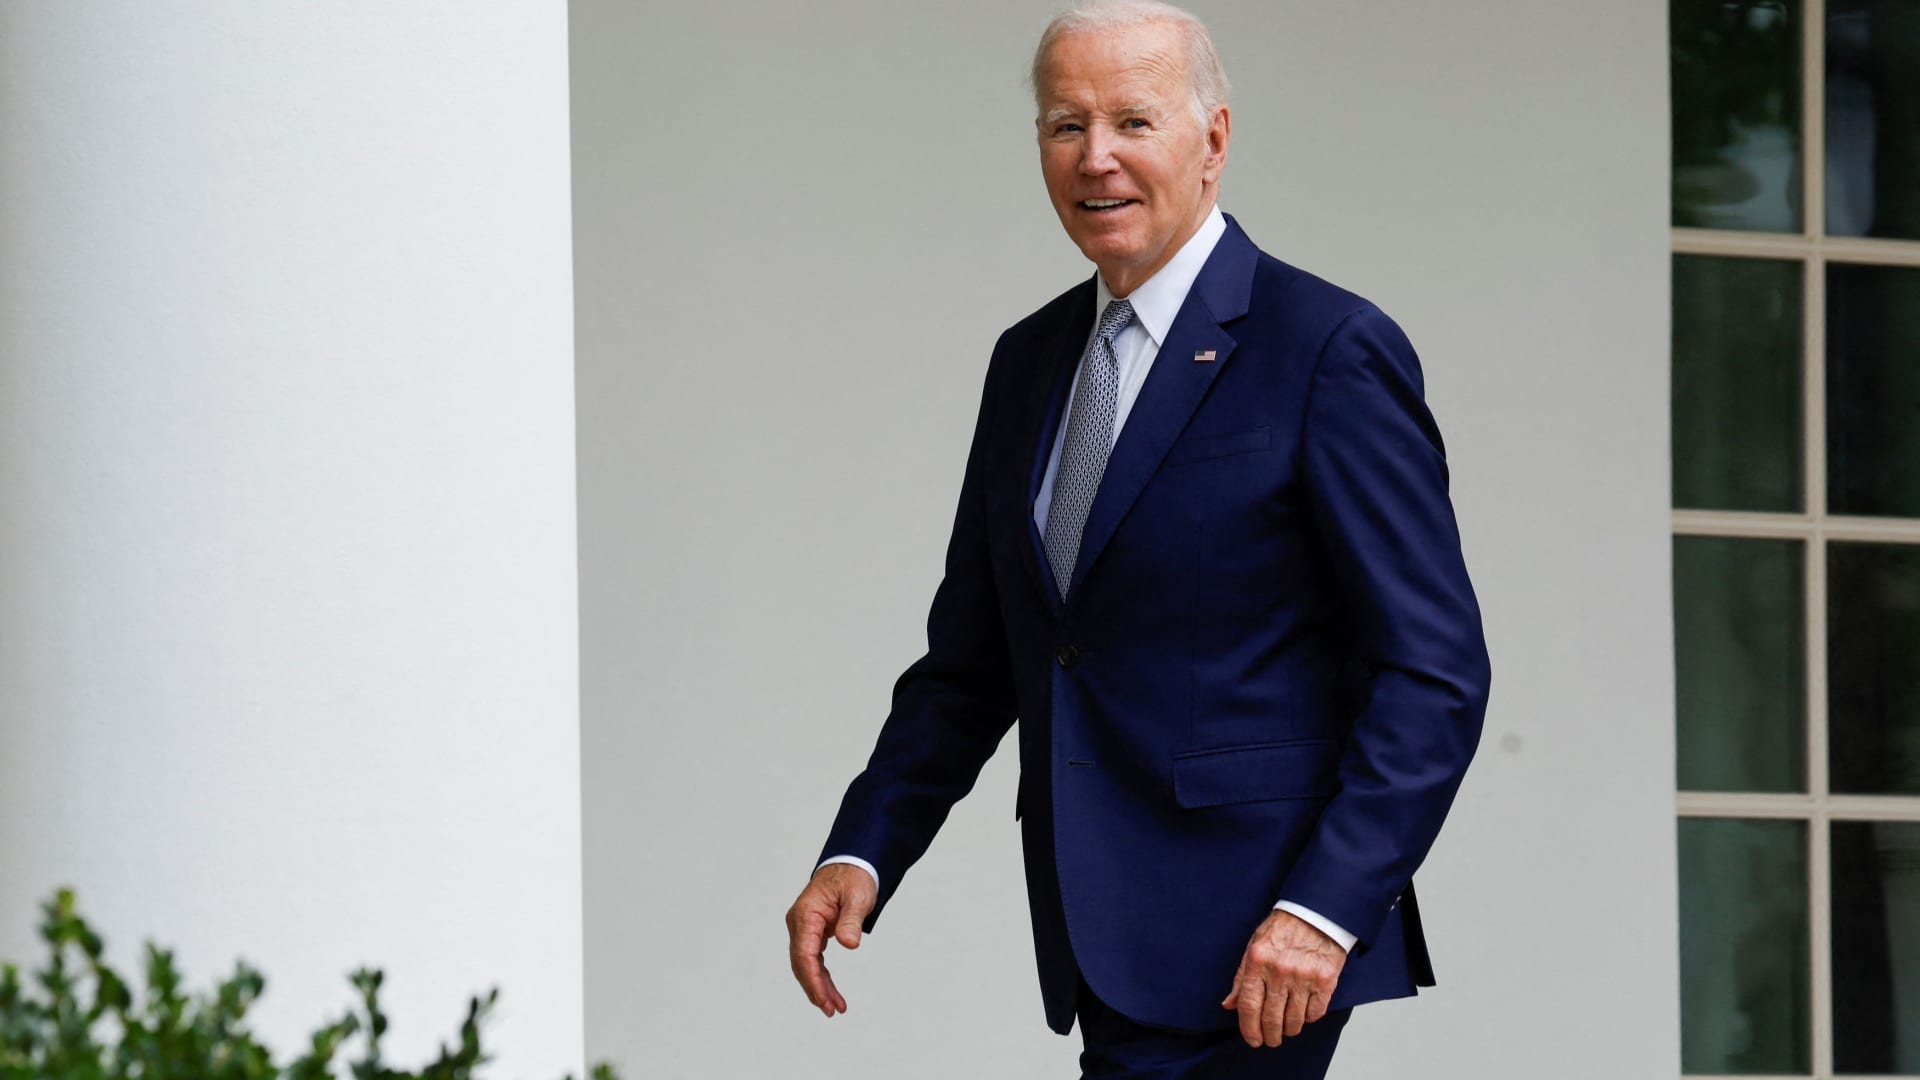 U.S. President Joe Biden smiles as he responds to a reporter's question about whether he will visit striking auto workers on the UAW picket line, as he walks back to the Oval Office after an event announcing the creation of a new White House Office of Gun Violence Prevention, in the Rose Garden of the White House in Washington, U.S. September 22, 2023. 